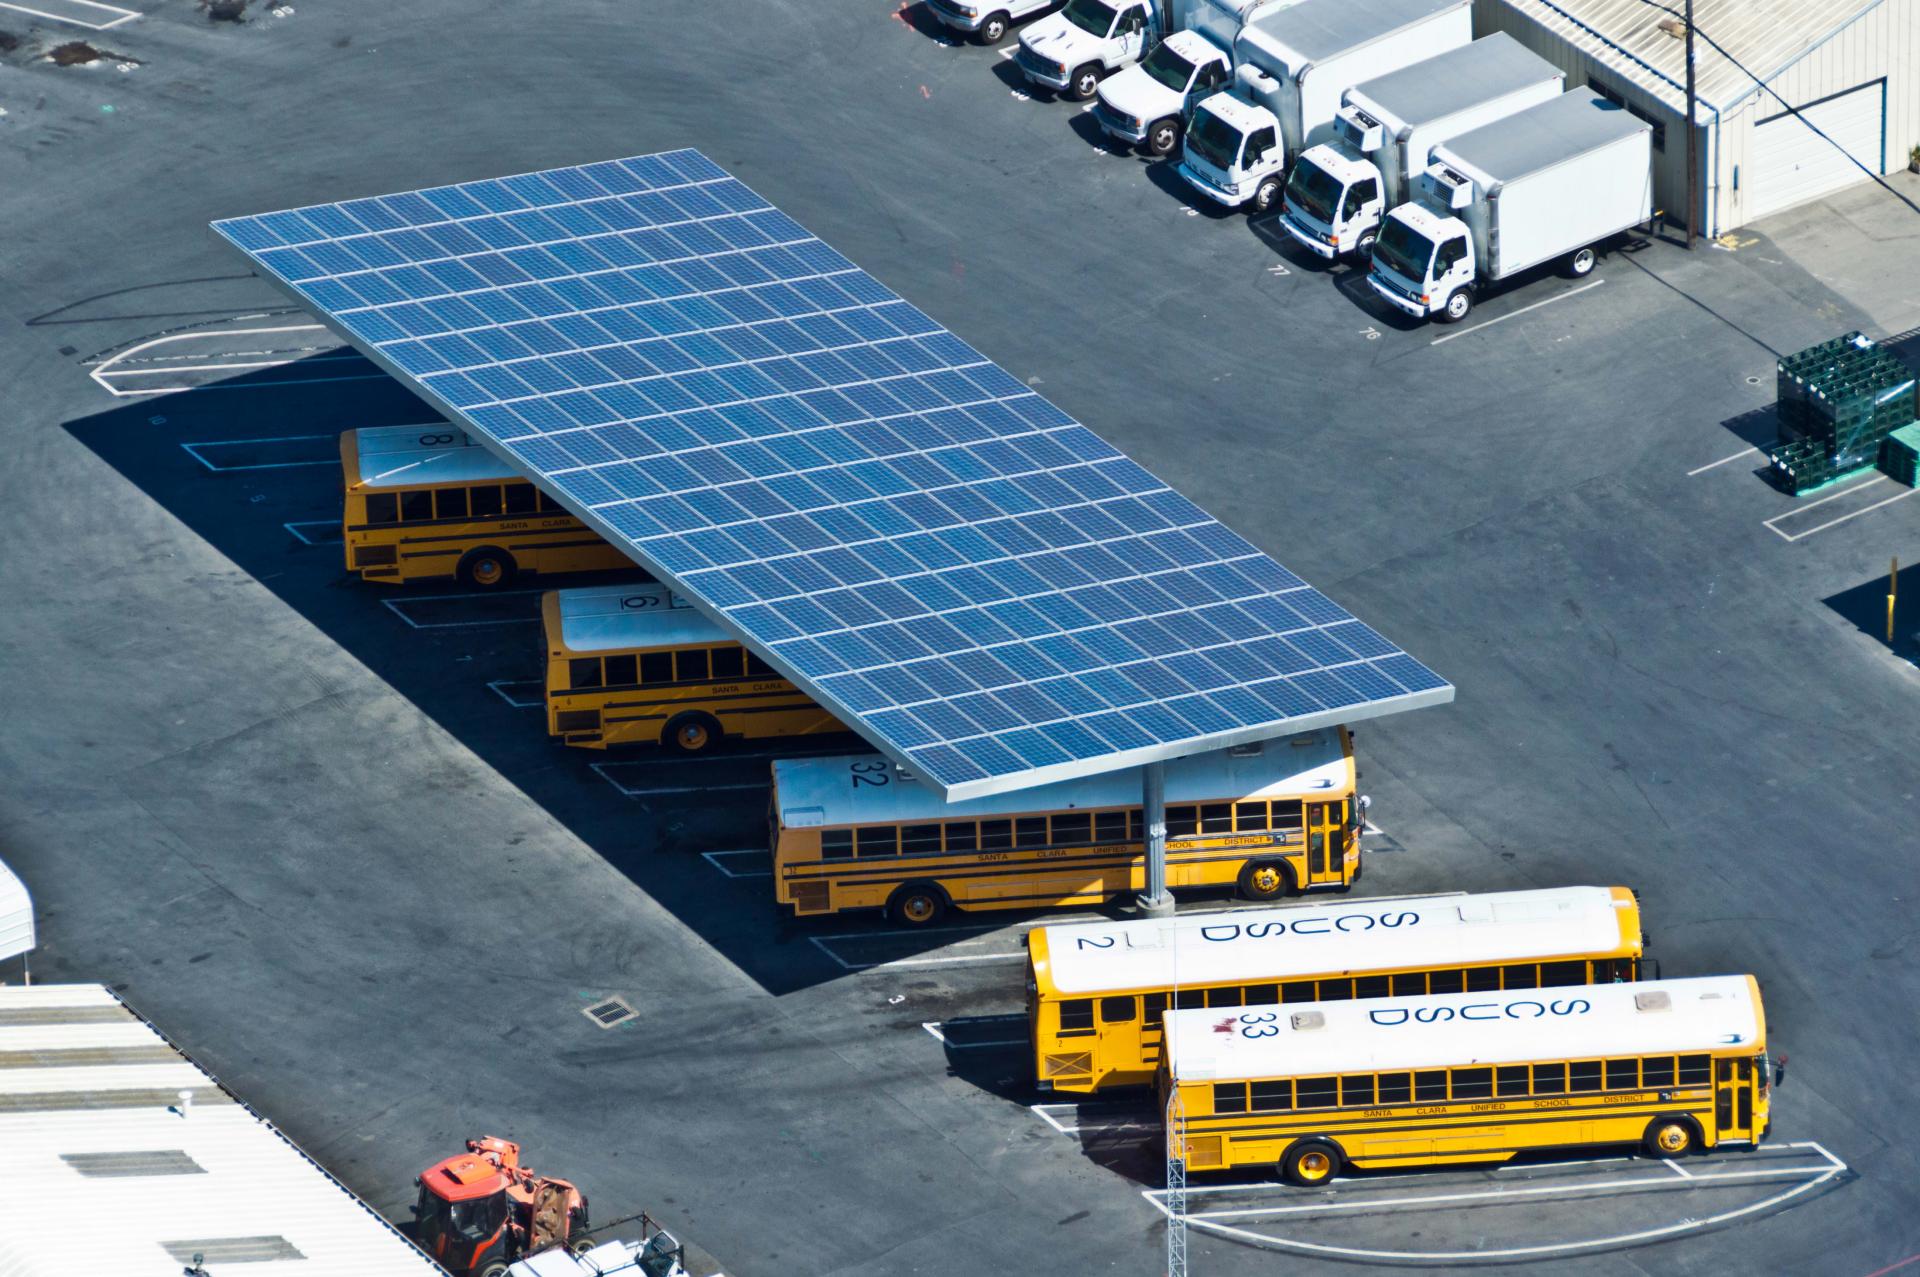 Sacramento City Unified School District uses solar panels to cover their bus fleet.